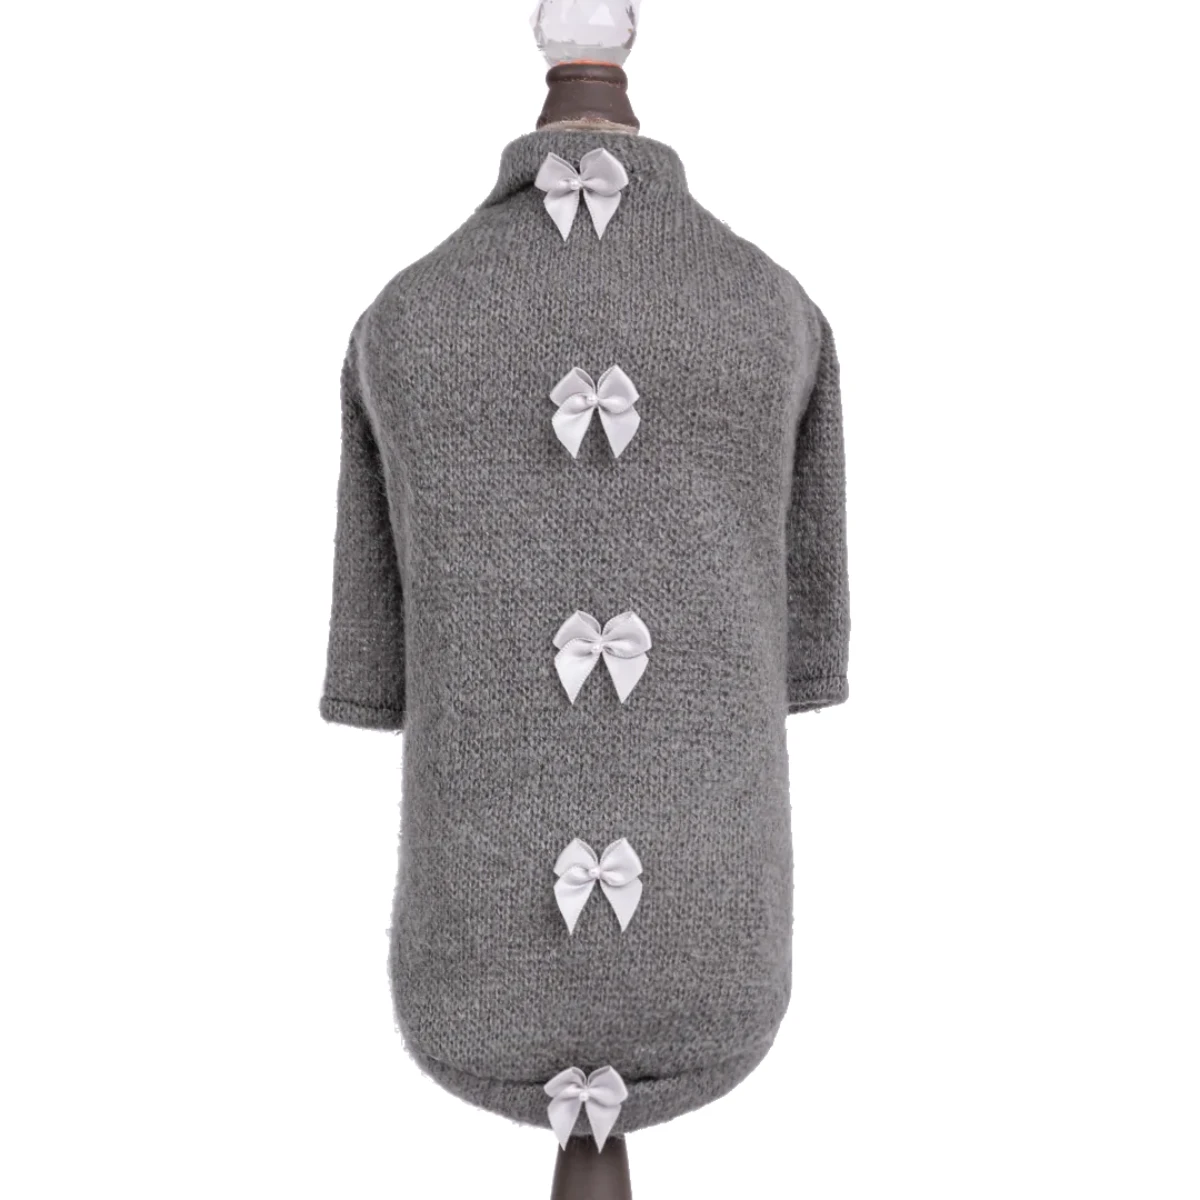 Hello Doggie Dainty Bow Dog Sweater - Pewter Gray